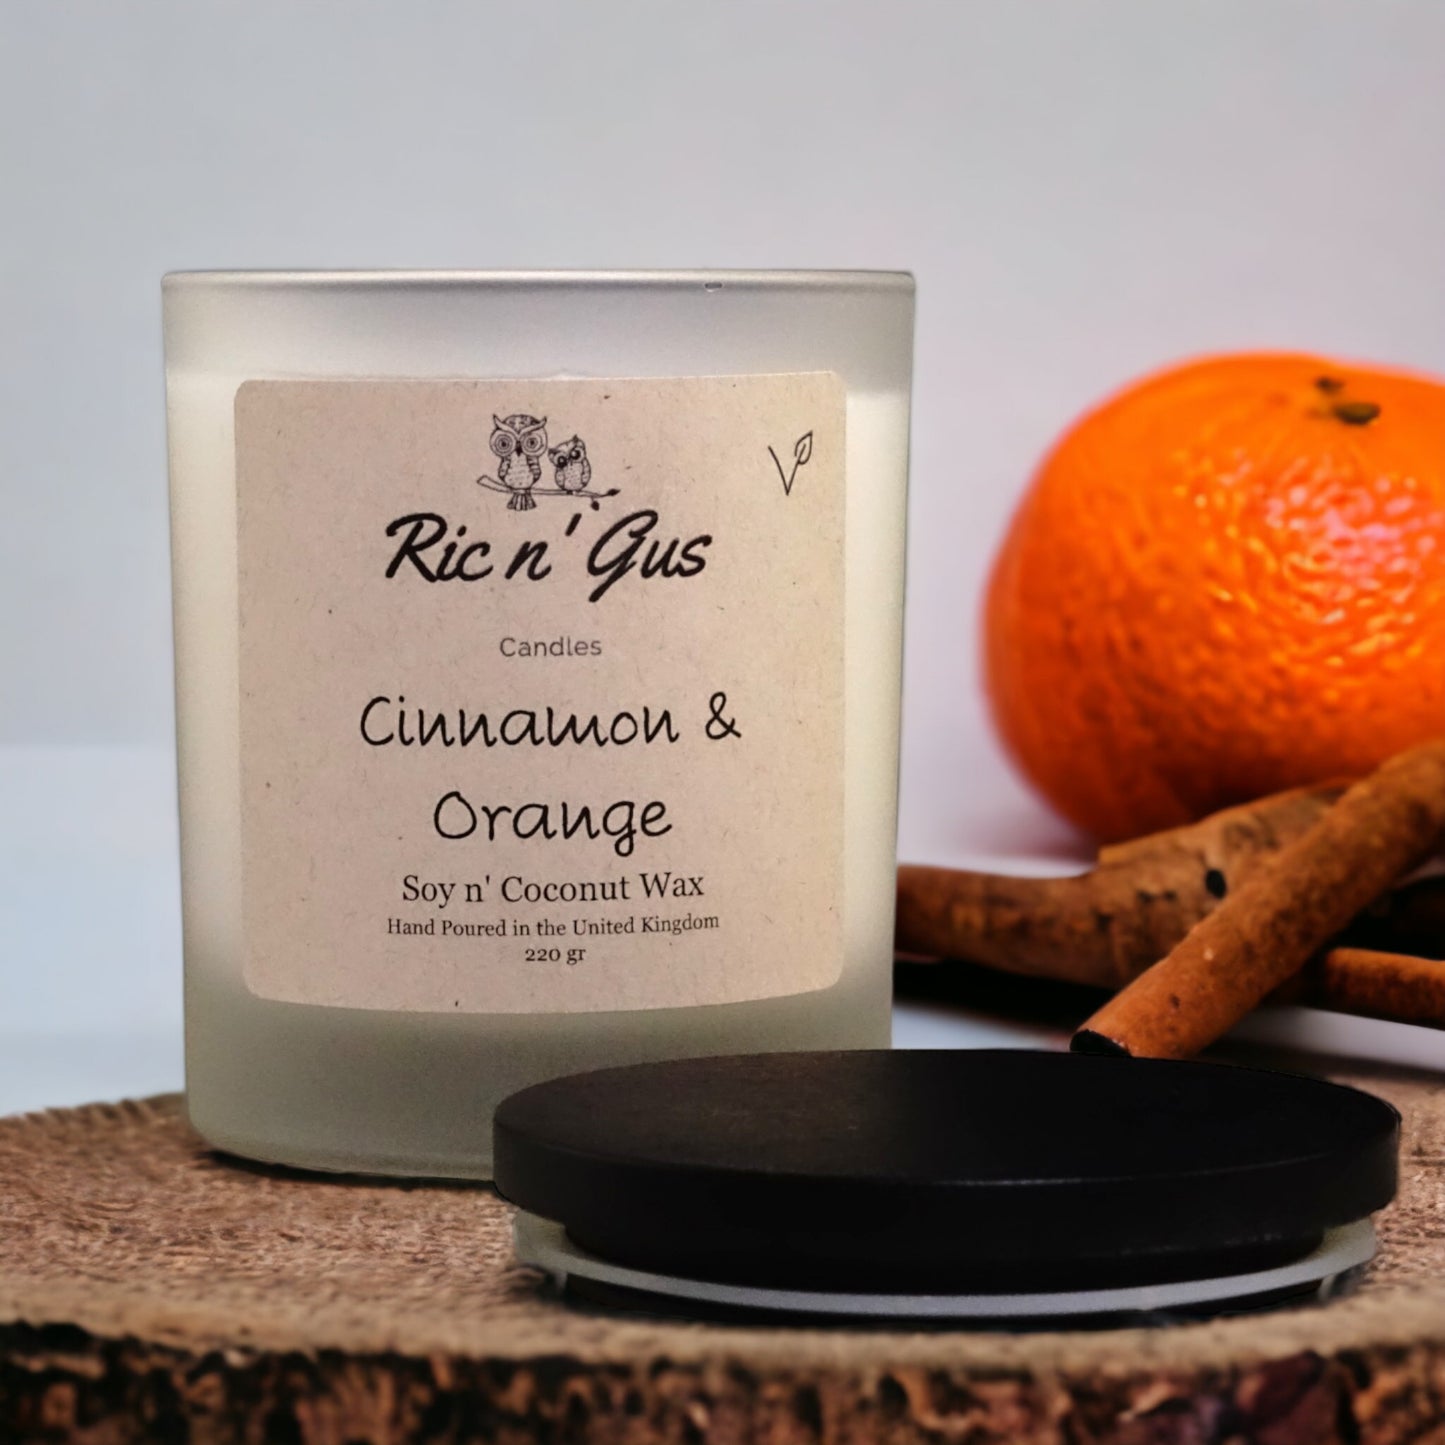 Cinnamon & Orange Candle, soy wax, natural, toxin-free